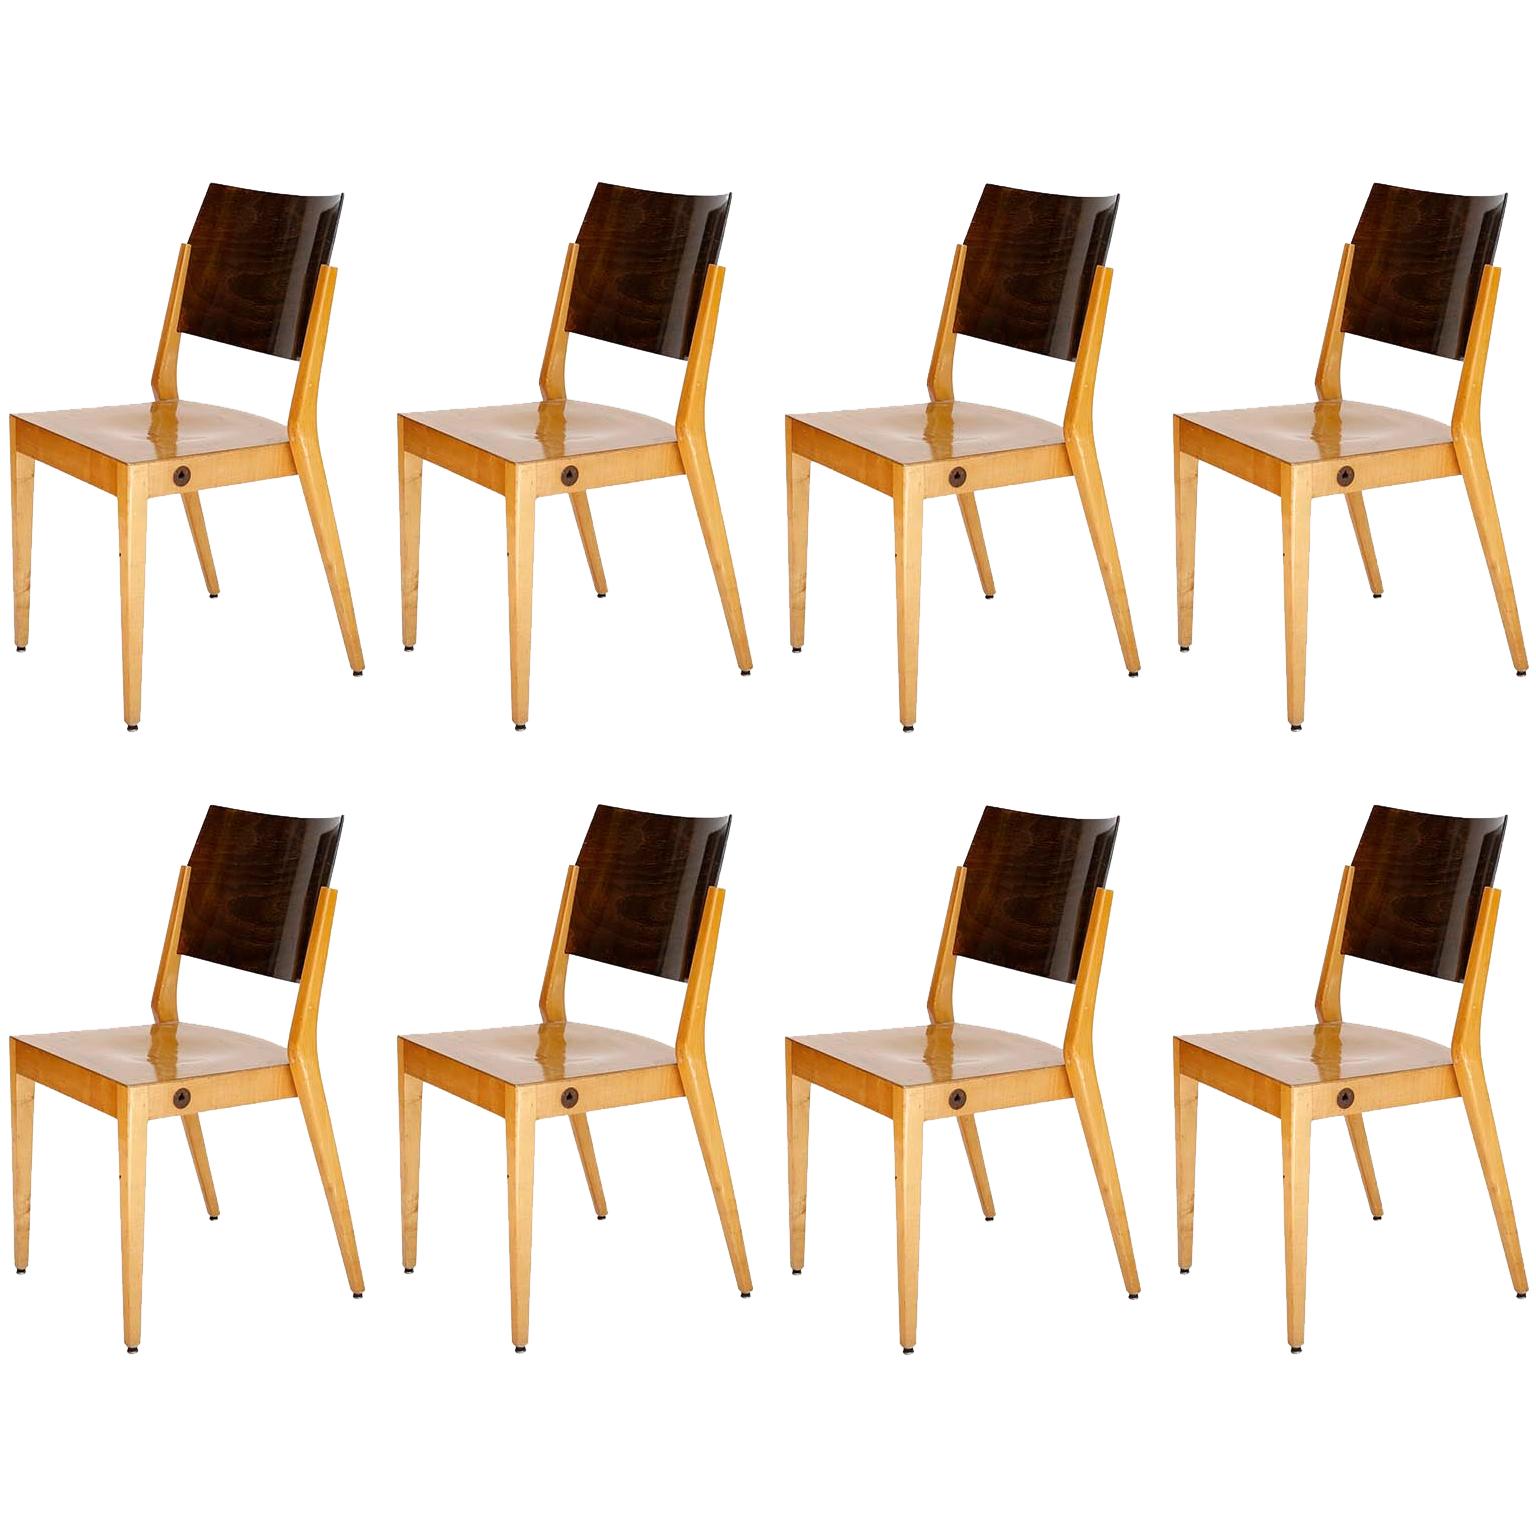 Eight Stacking Chairs by Karl Schwanzer, Thonet, Bicolored Wood, Austria, 1953